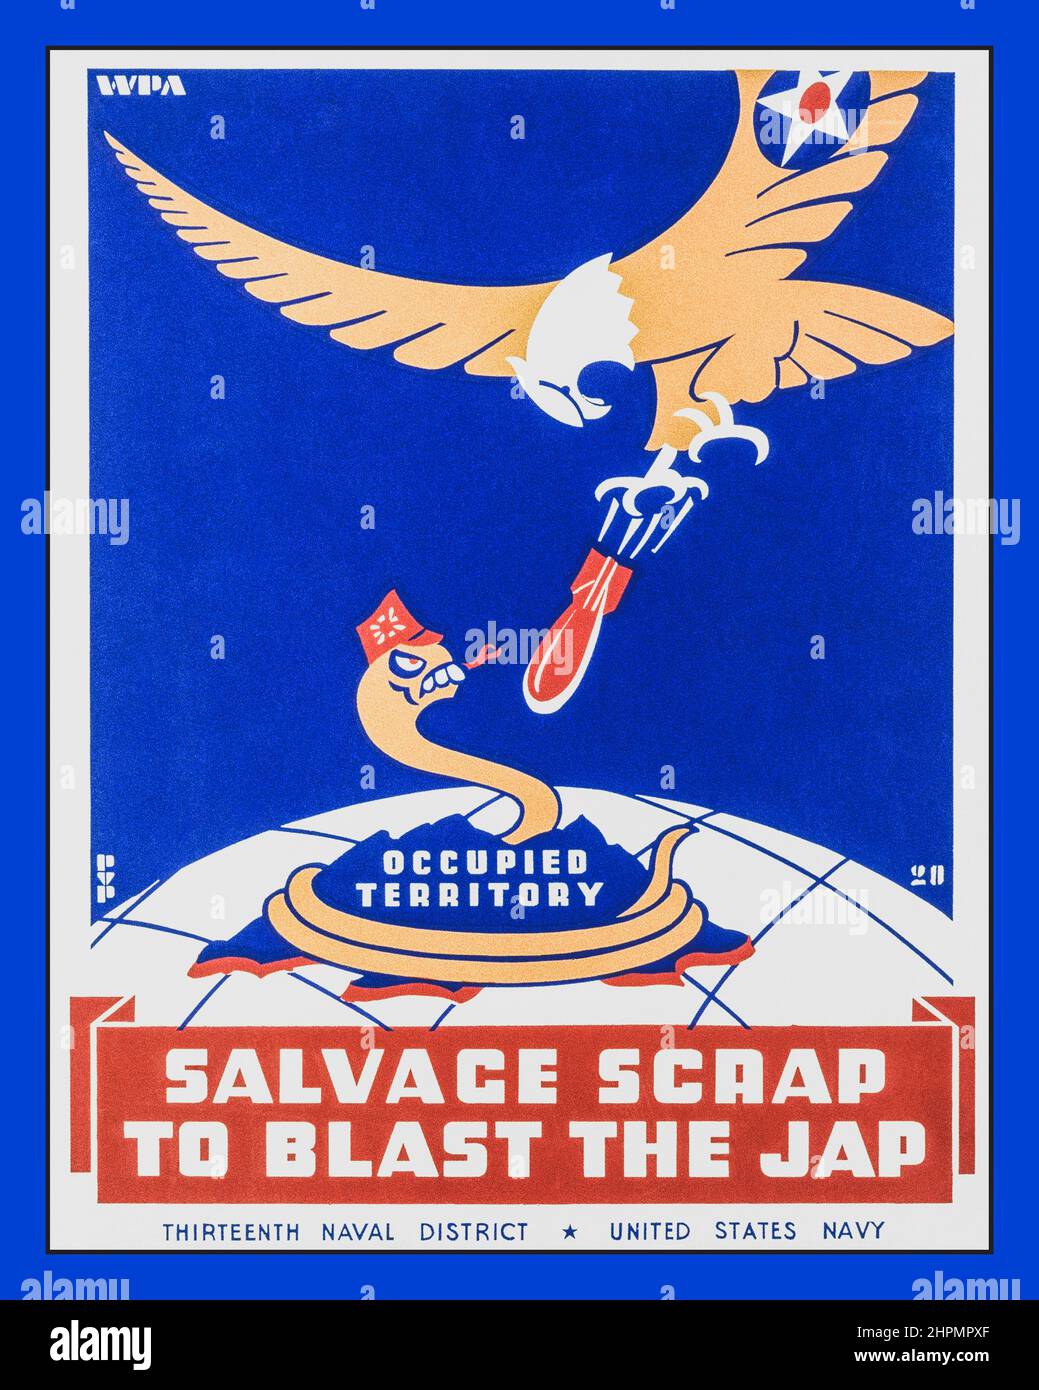 WW2 USA Navy Propaganda Poster SALVAGE SCRAP TO BLAST THE JAP WW2 Appeals Propaganda Poster for Thirteenth Naval District, United States Navy, showing a snake representing Japan being bombed by an American eagle. American propaganda during World War II. December 1941 Stock Photo